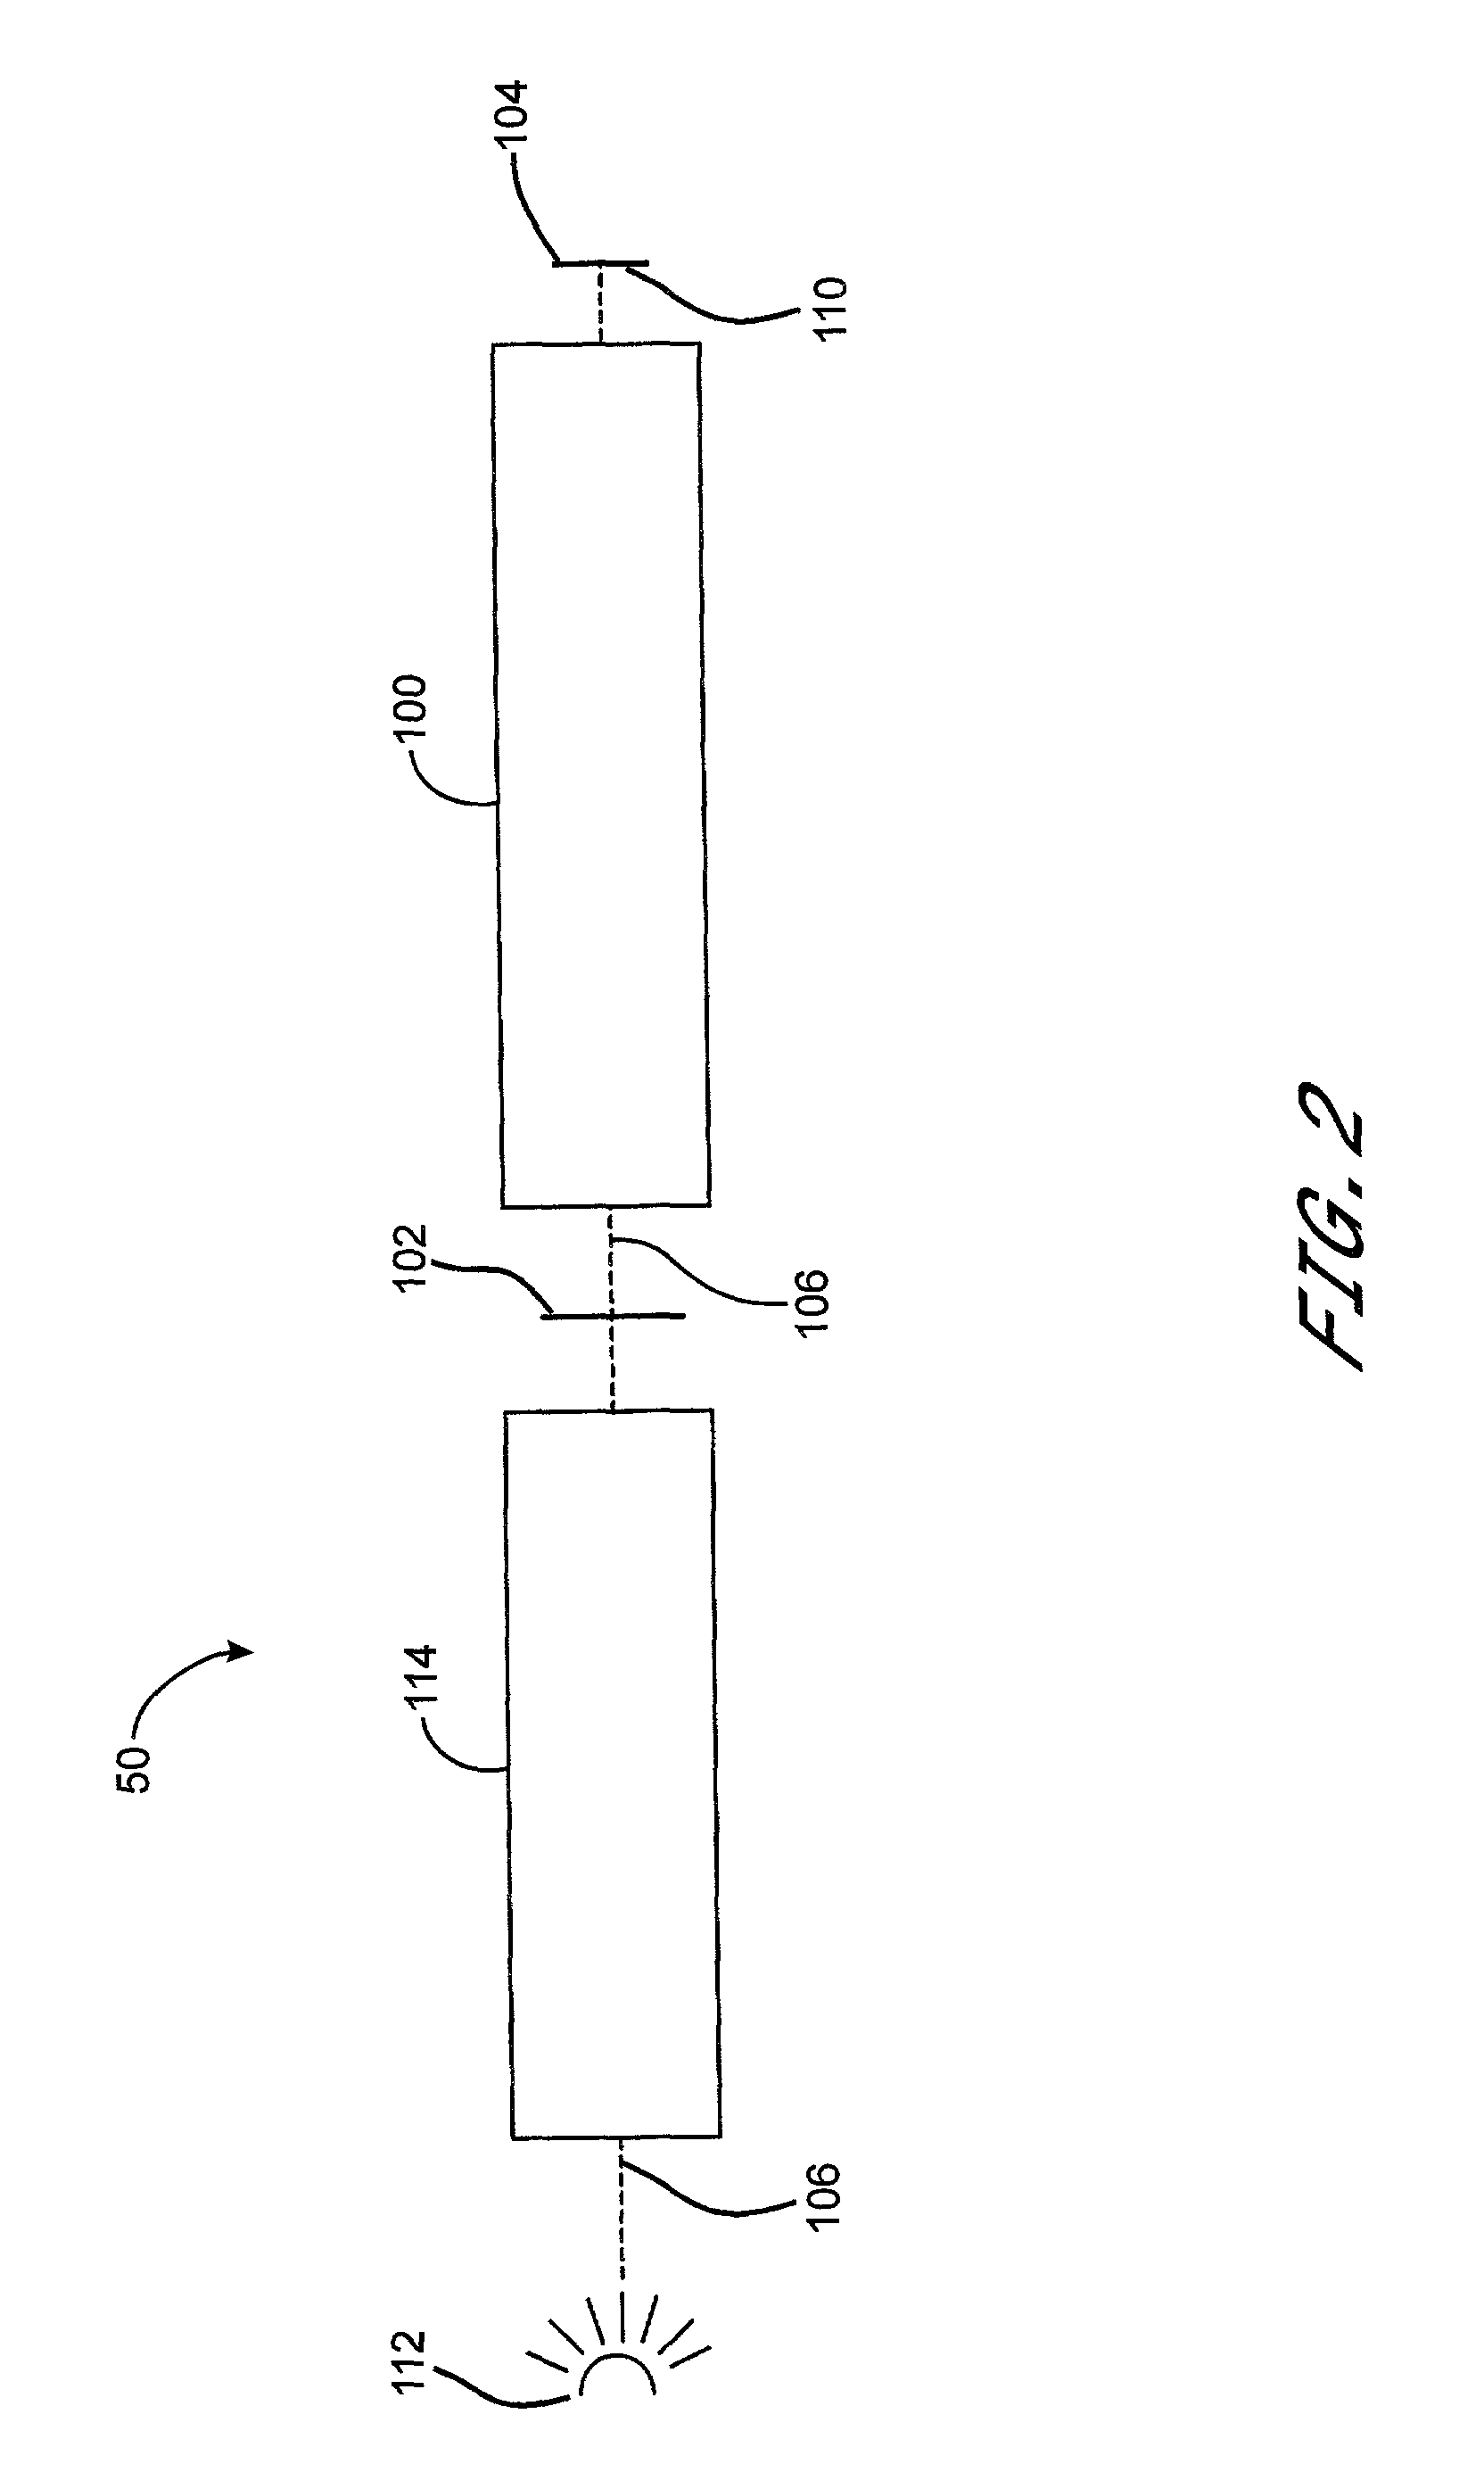 Methods for reducing aberration in optical systems